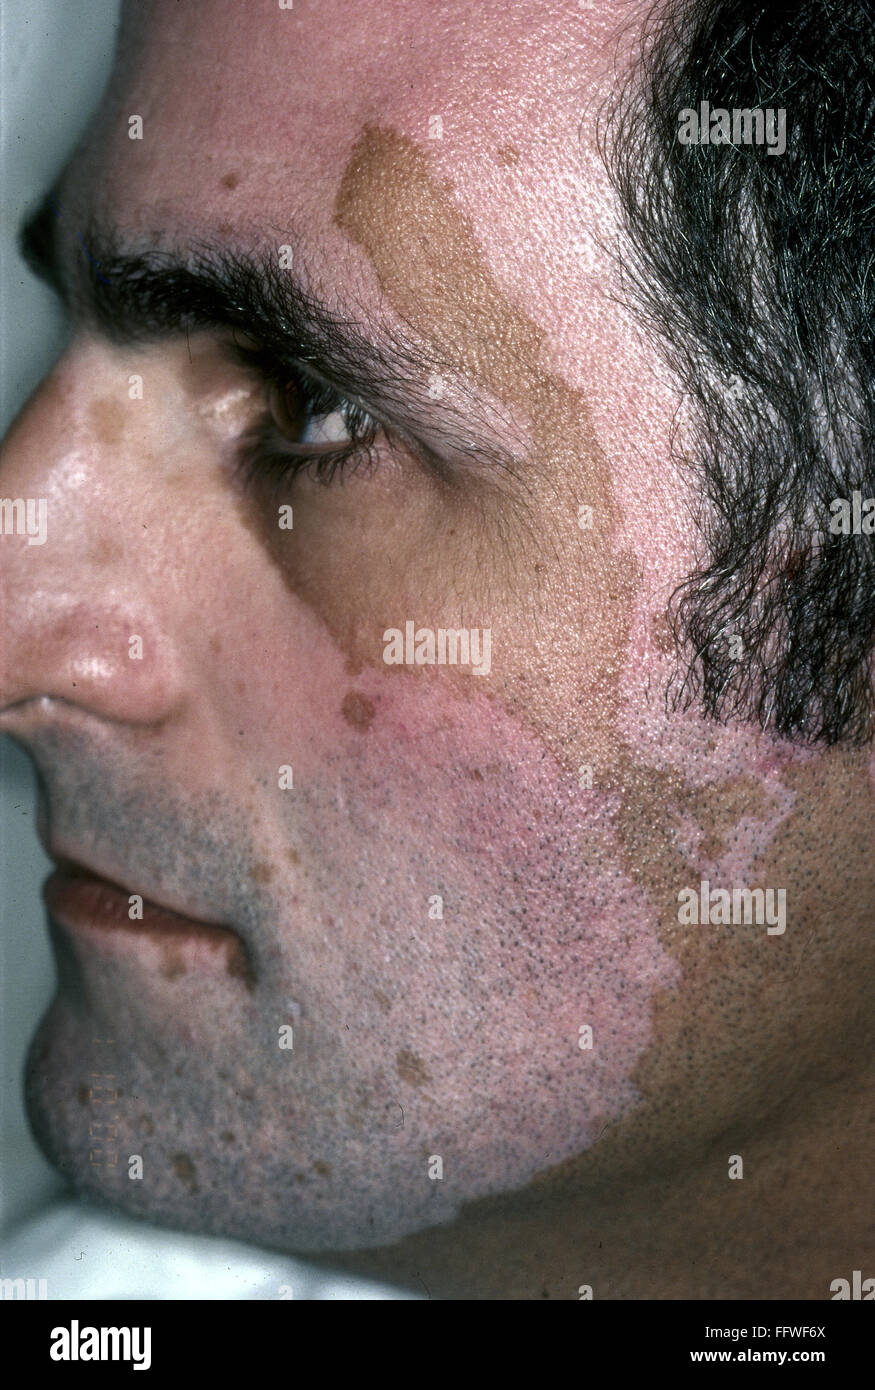 SKIN CONDITION, 2000. /nClose-up of the face of a man suffering from skin discoloration. Photographed in 2000. Stock Photo